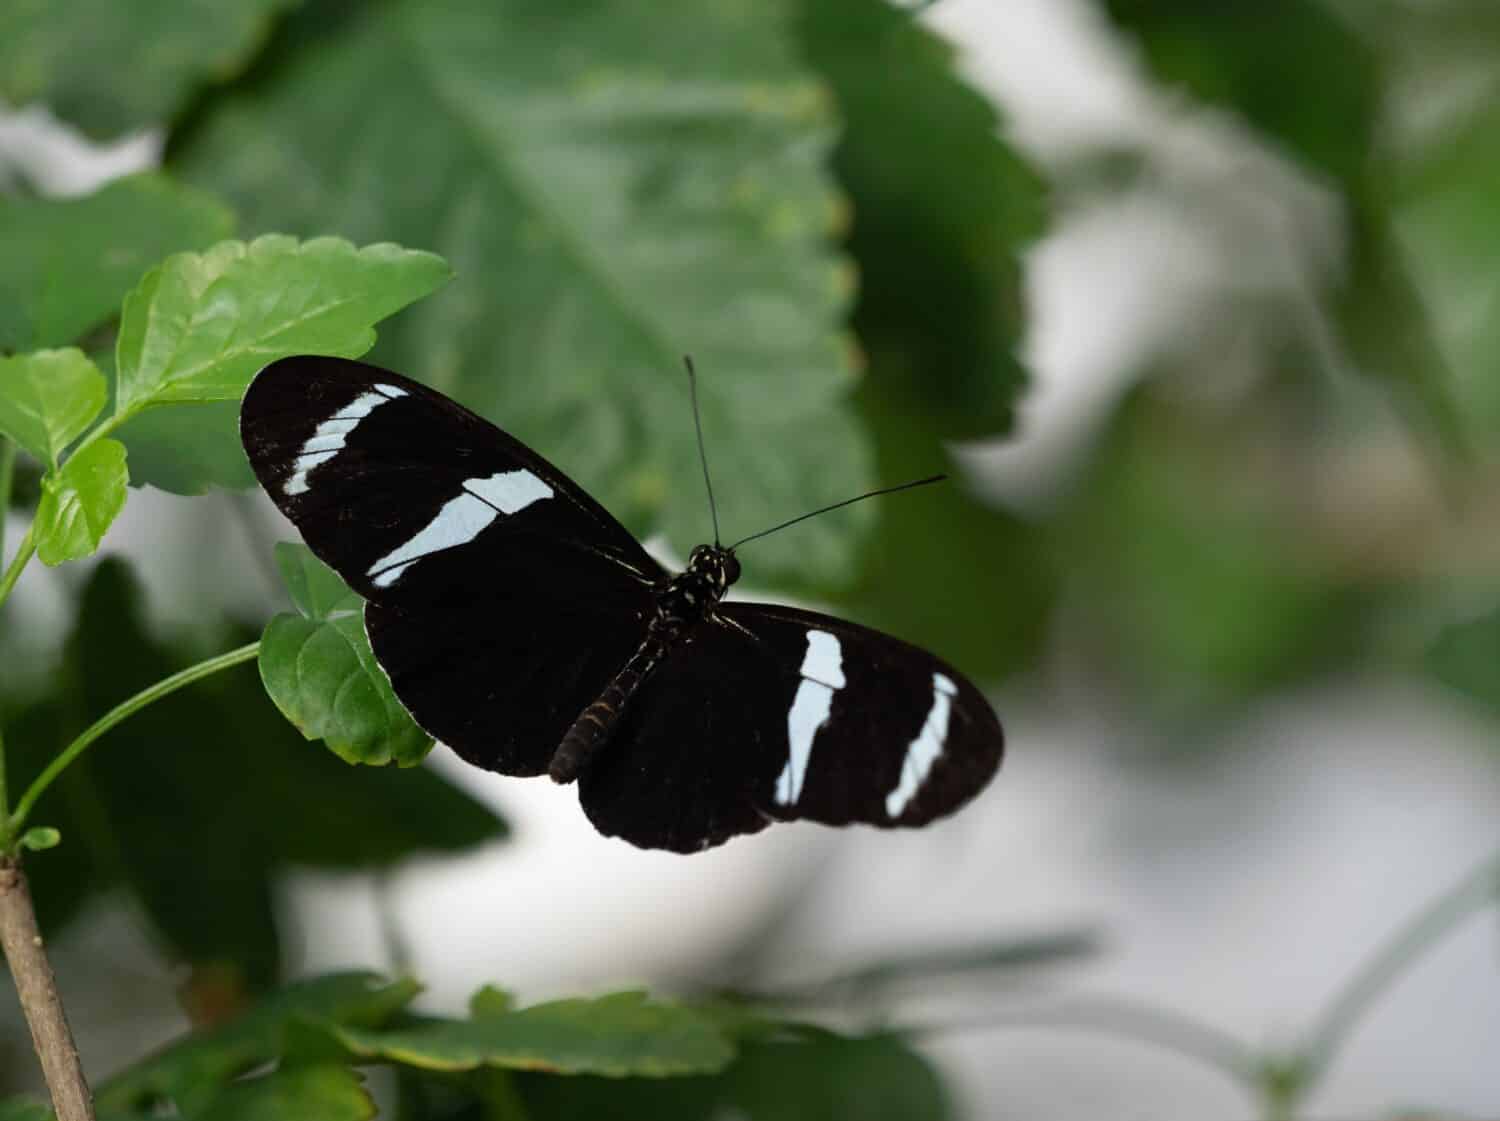 Black and white Antiochus Longwing or Helioconius antiochus butterfly perched on a green leaf with open wings. Photographed with a shallow depth of field in Houston, Texas.